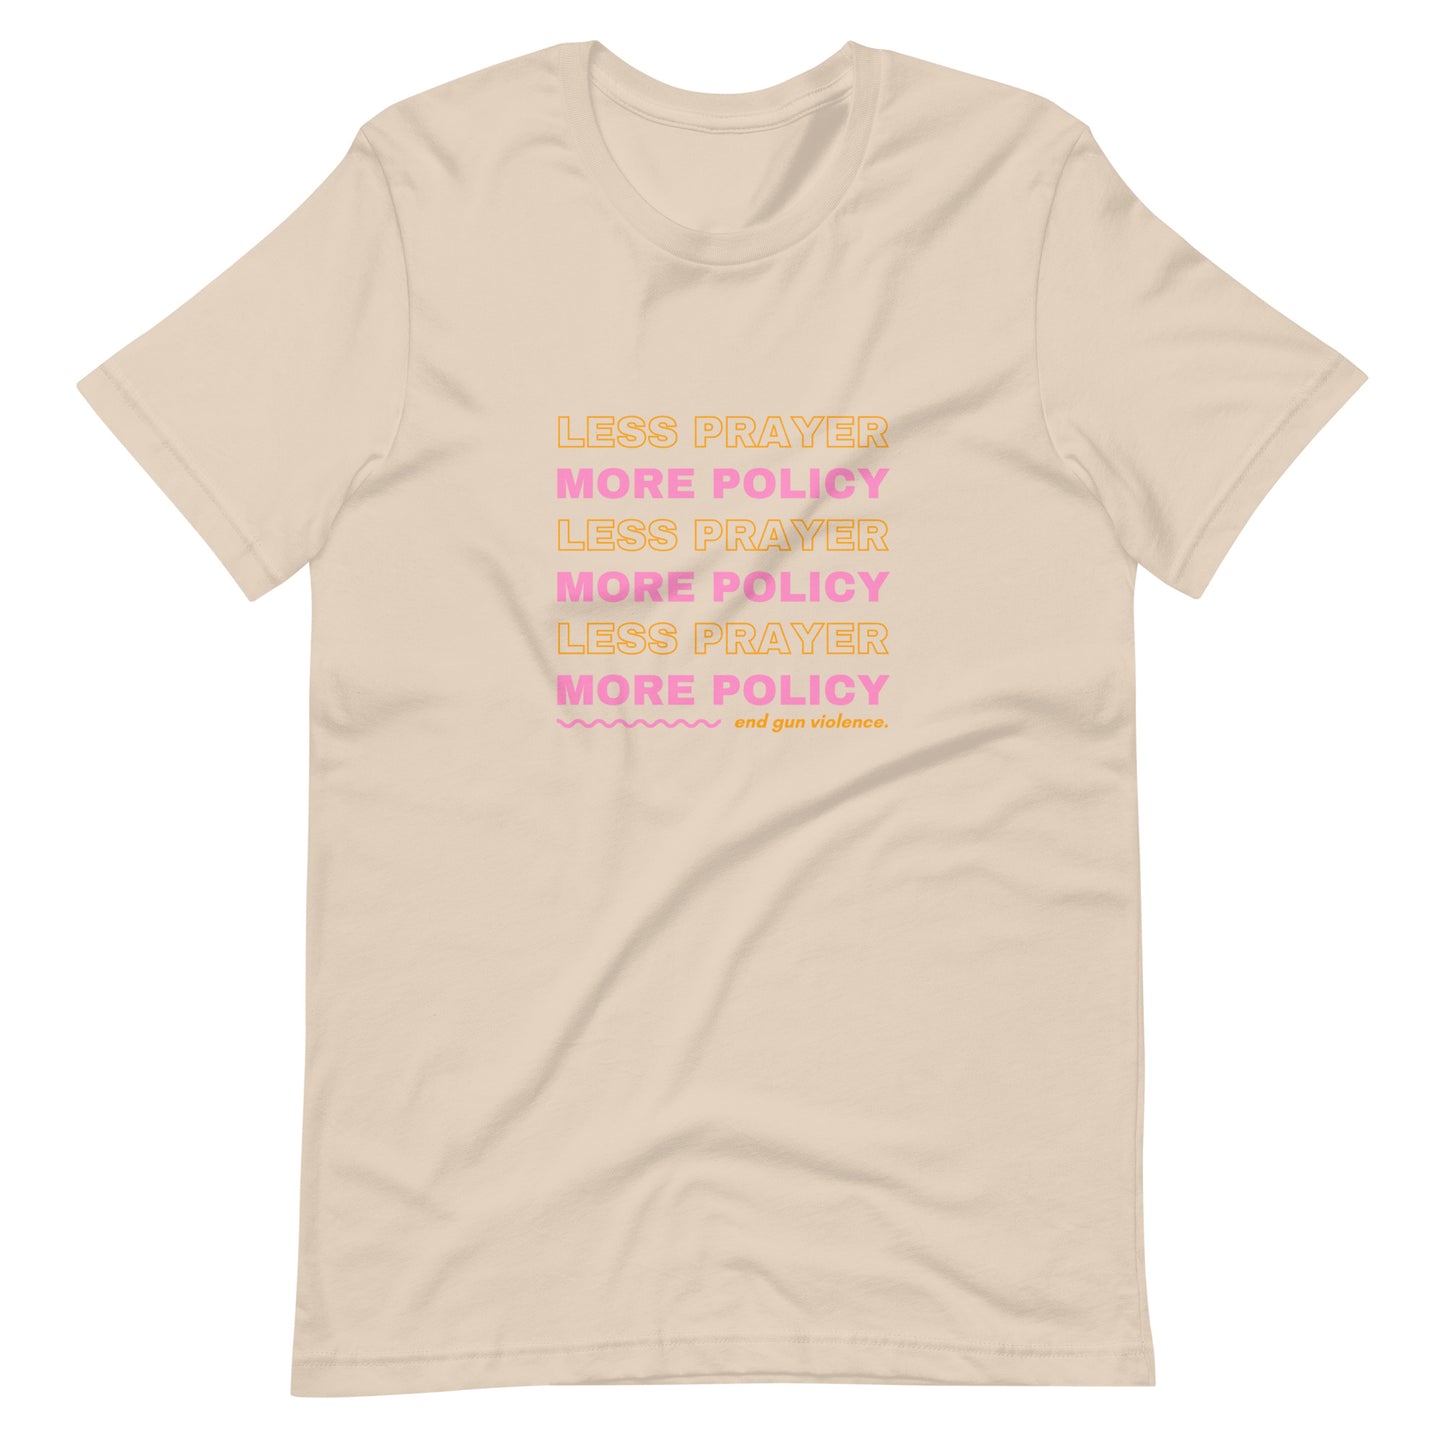 Less Prayer More Policy T-shirt // Profits donated to EveryTown